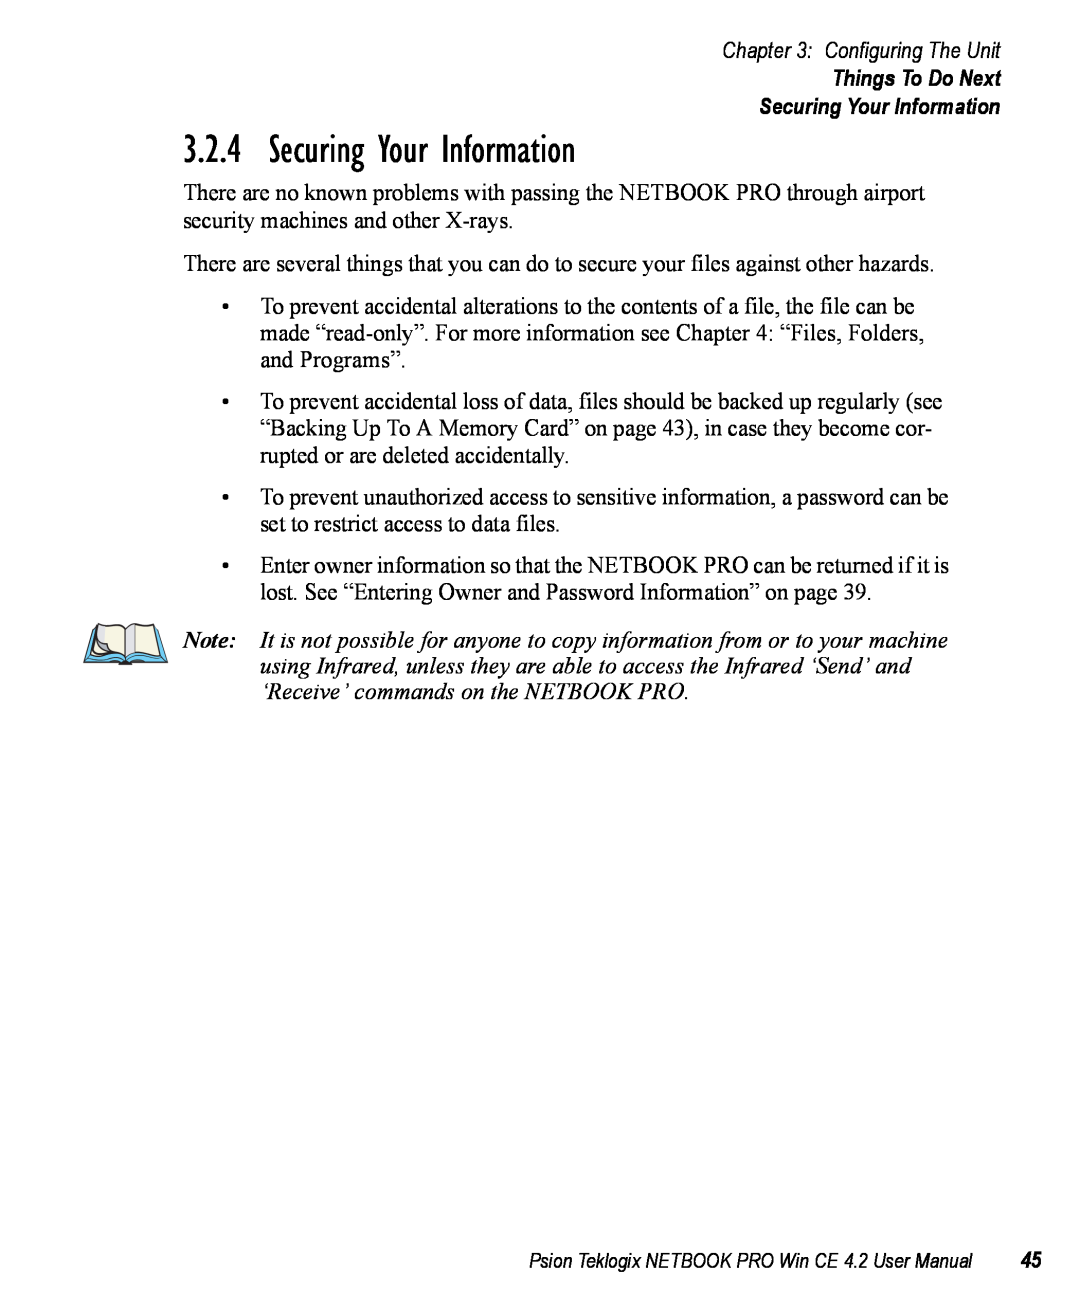 Psion Teklogix Win CE 4.2 user manual Things To Do Next Securing Your Information, Configuring The Unit 